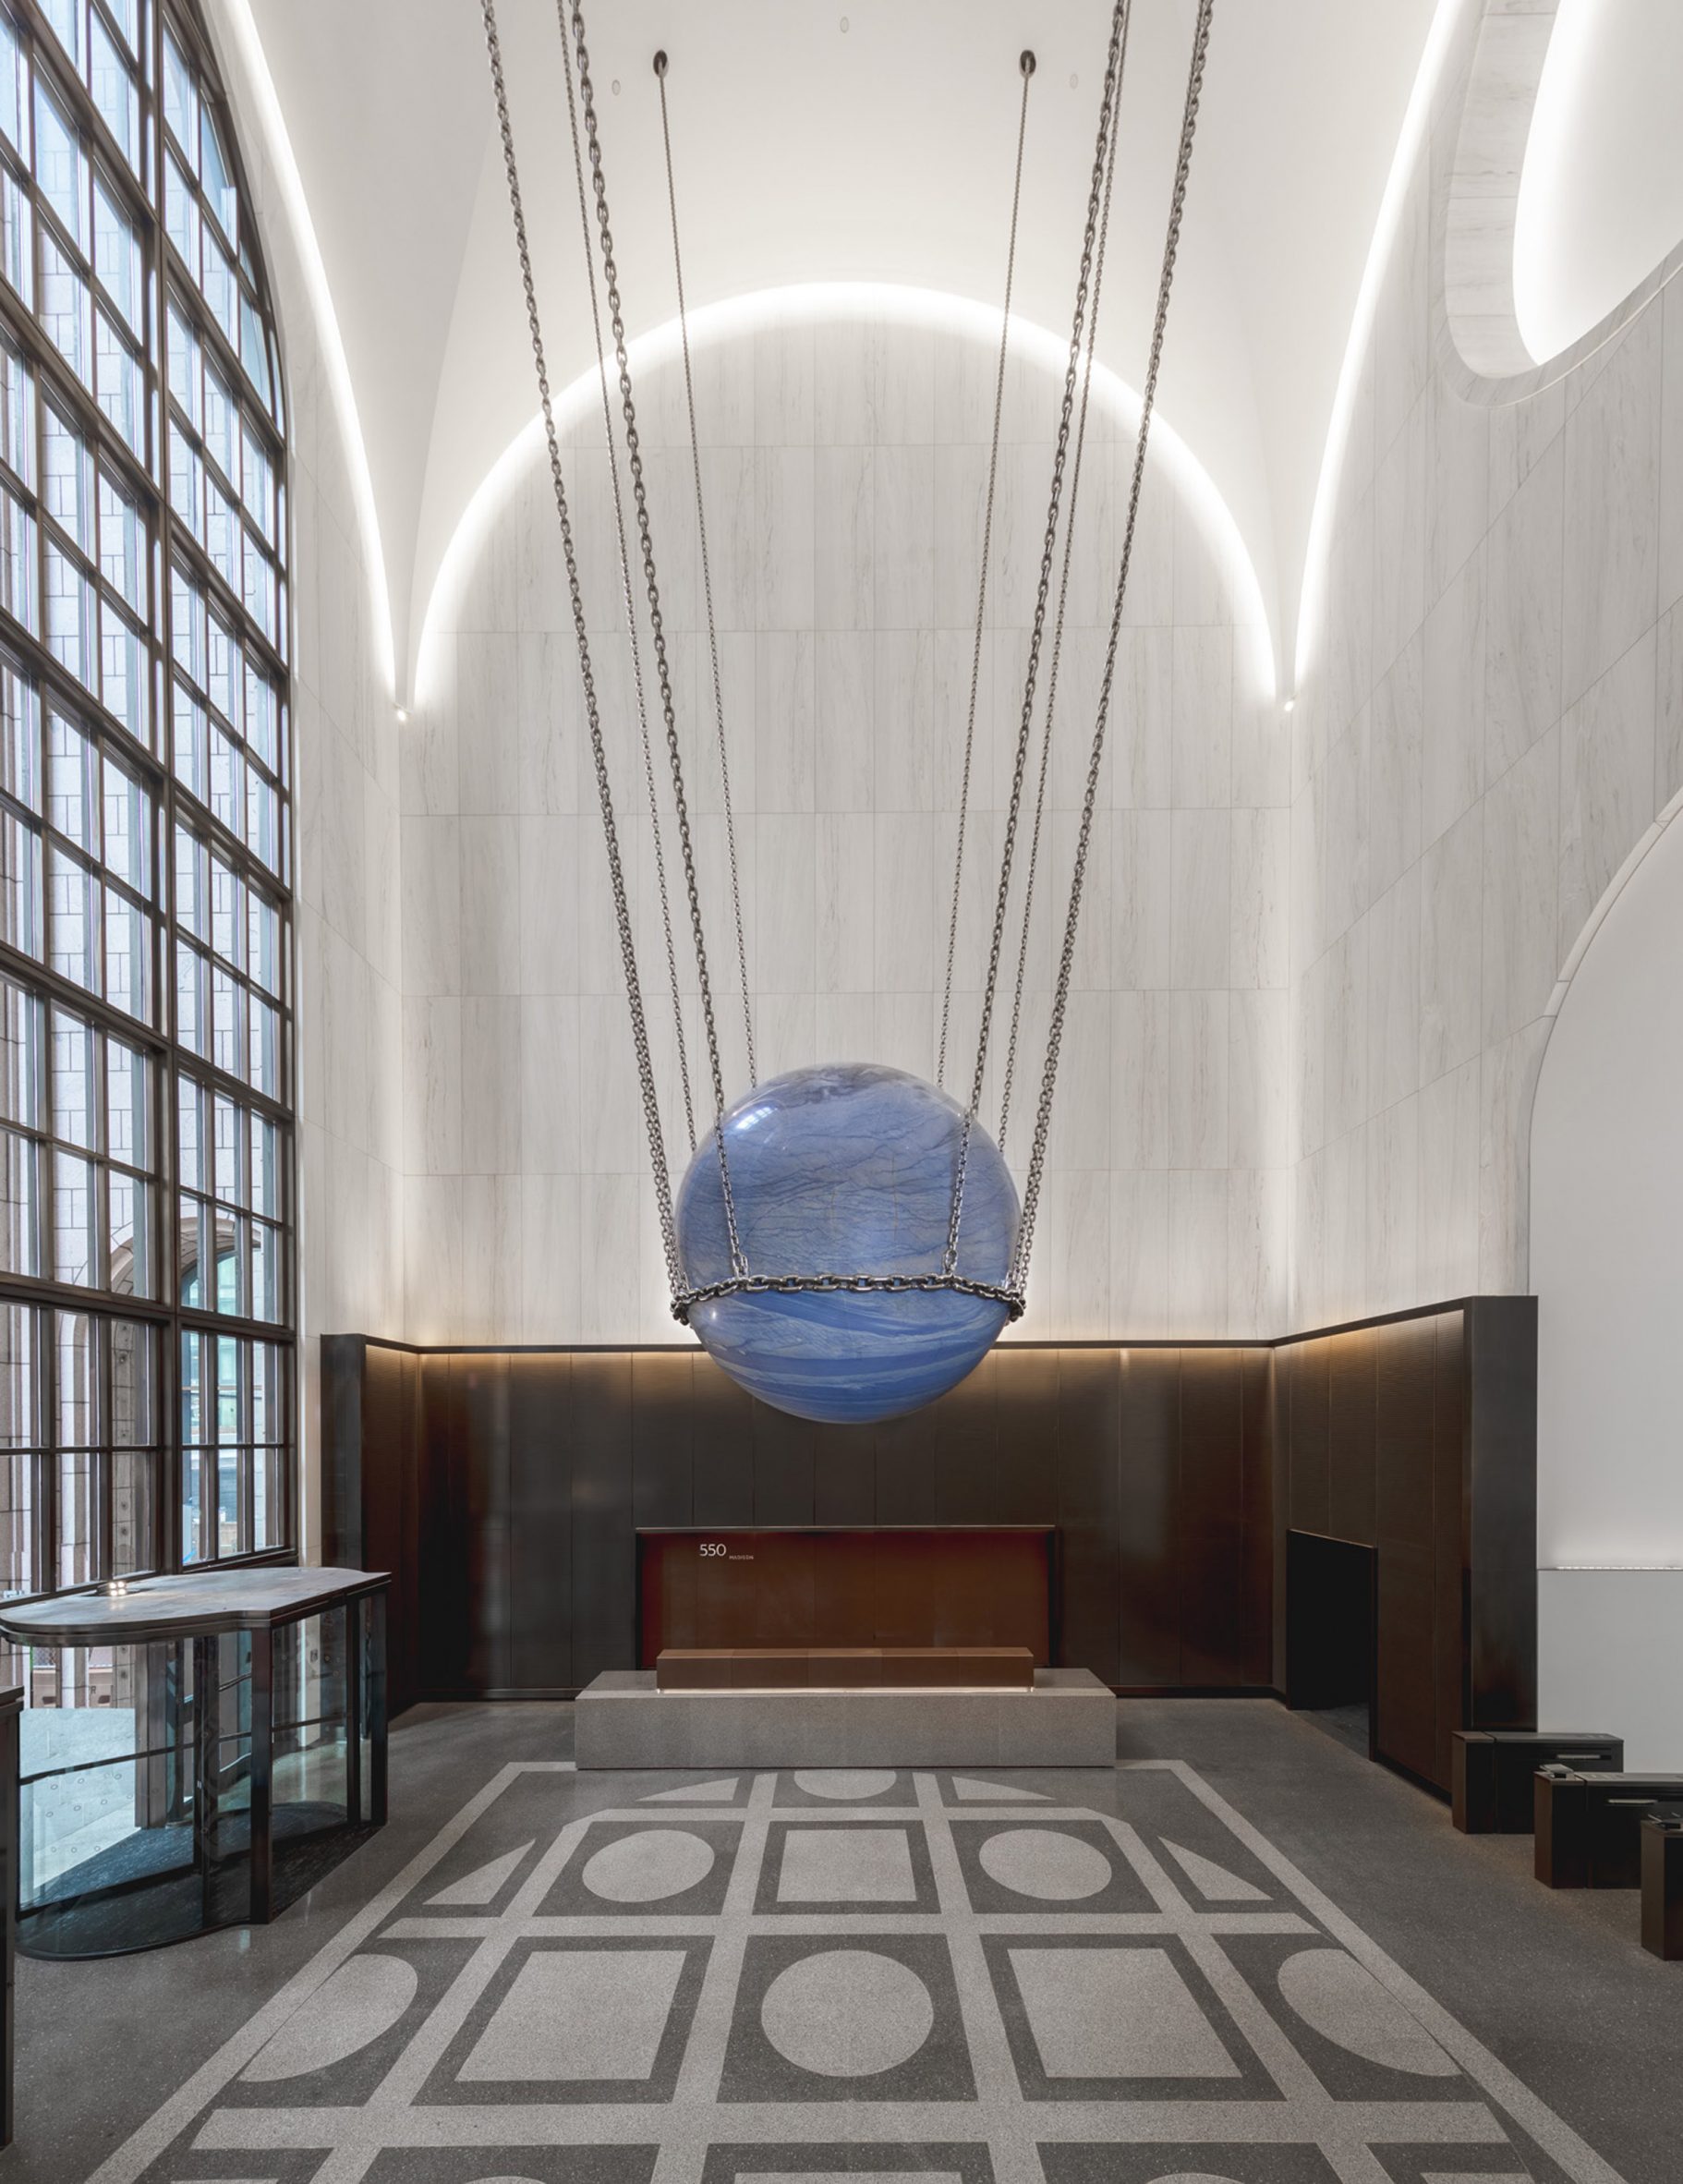 White marble was used across the walls of the lobby of 550 Madison